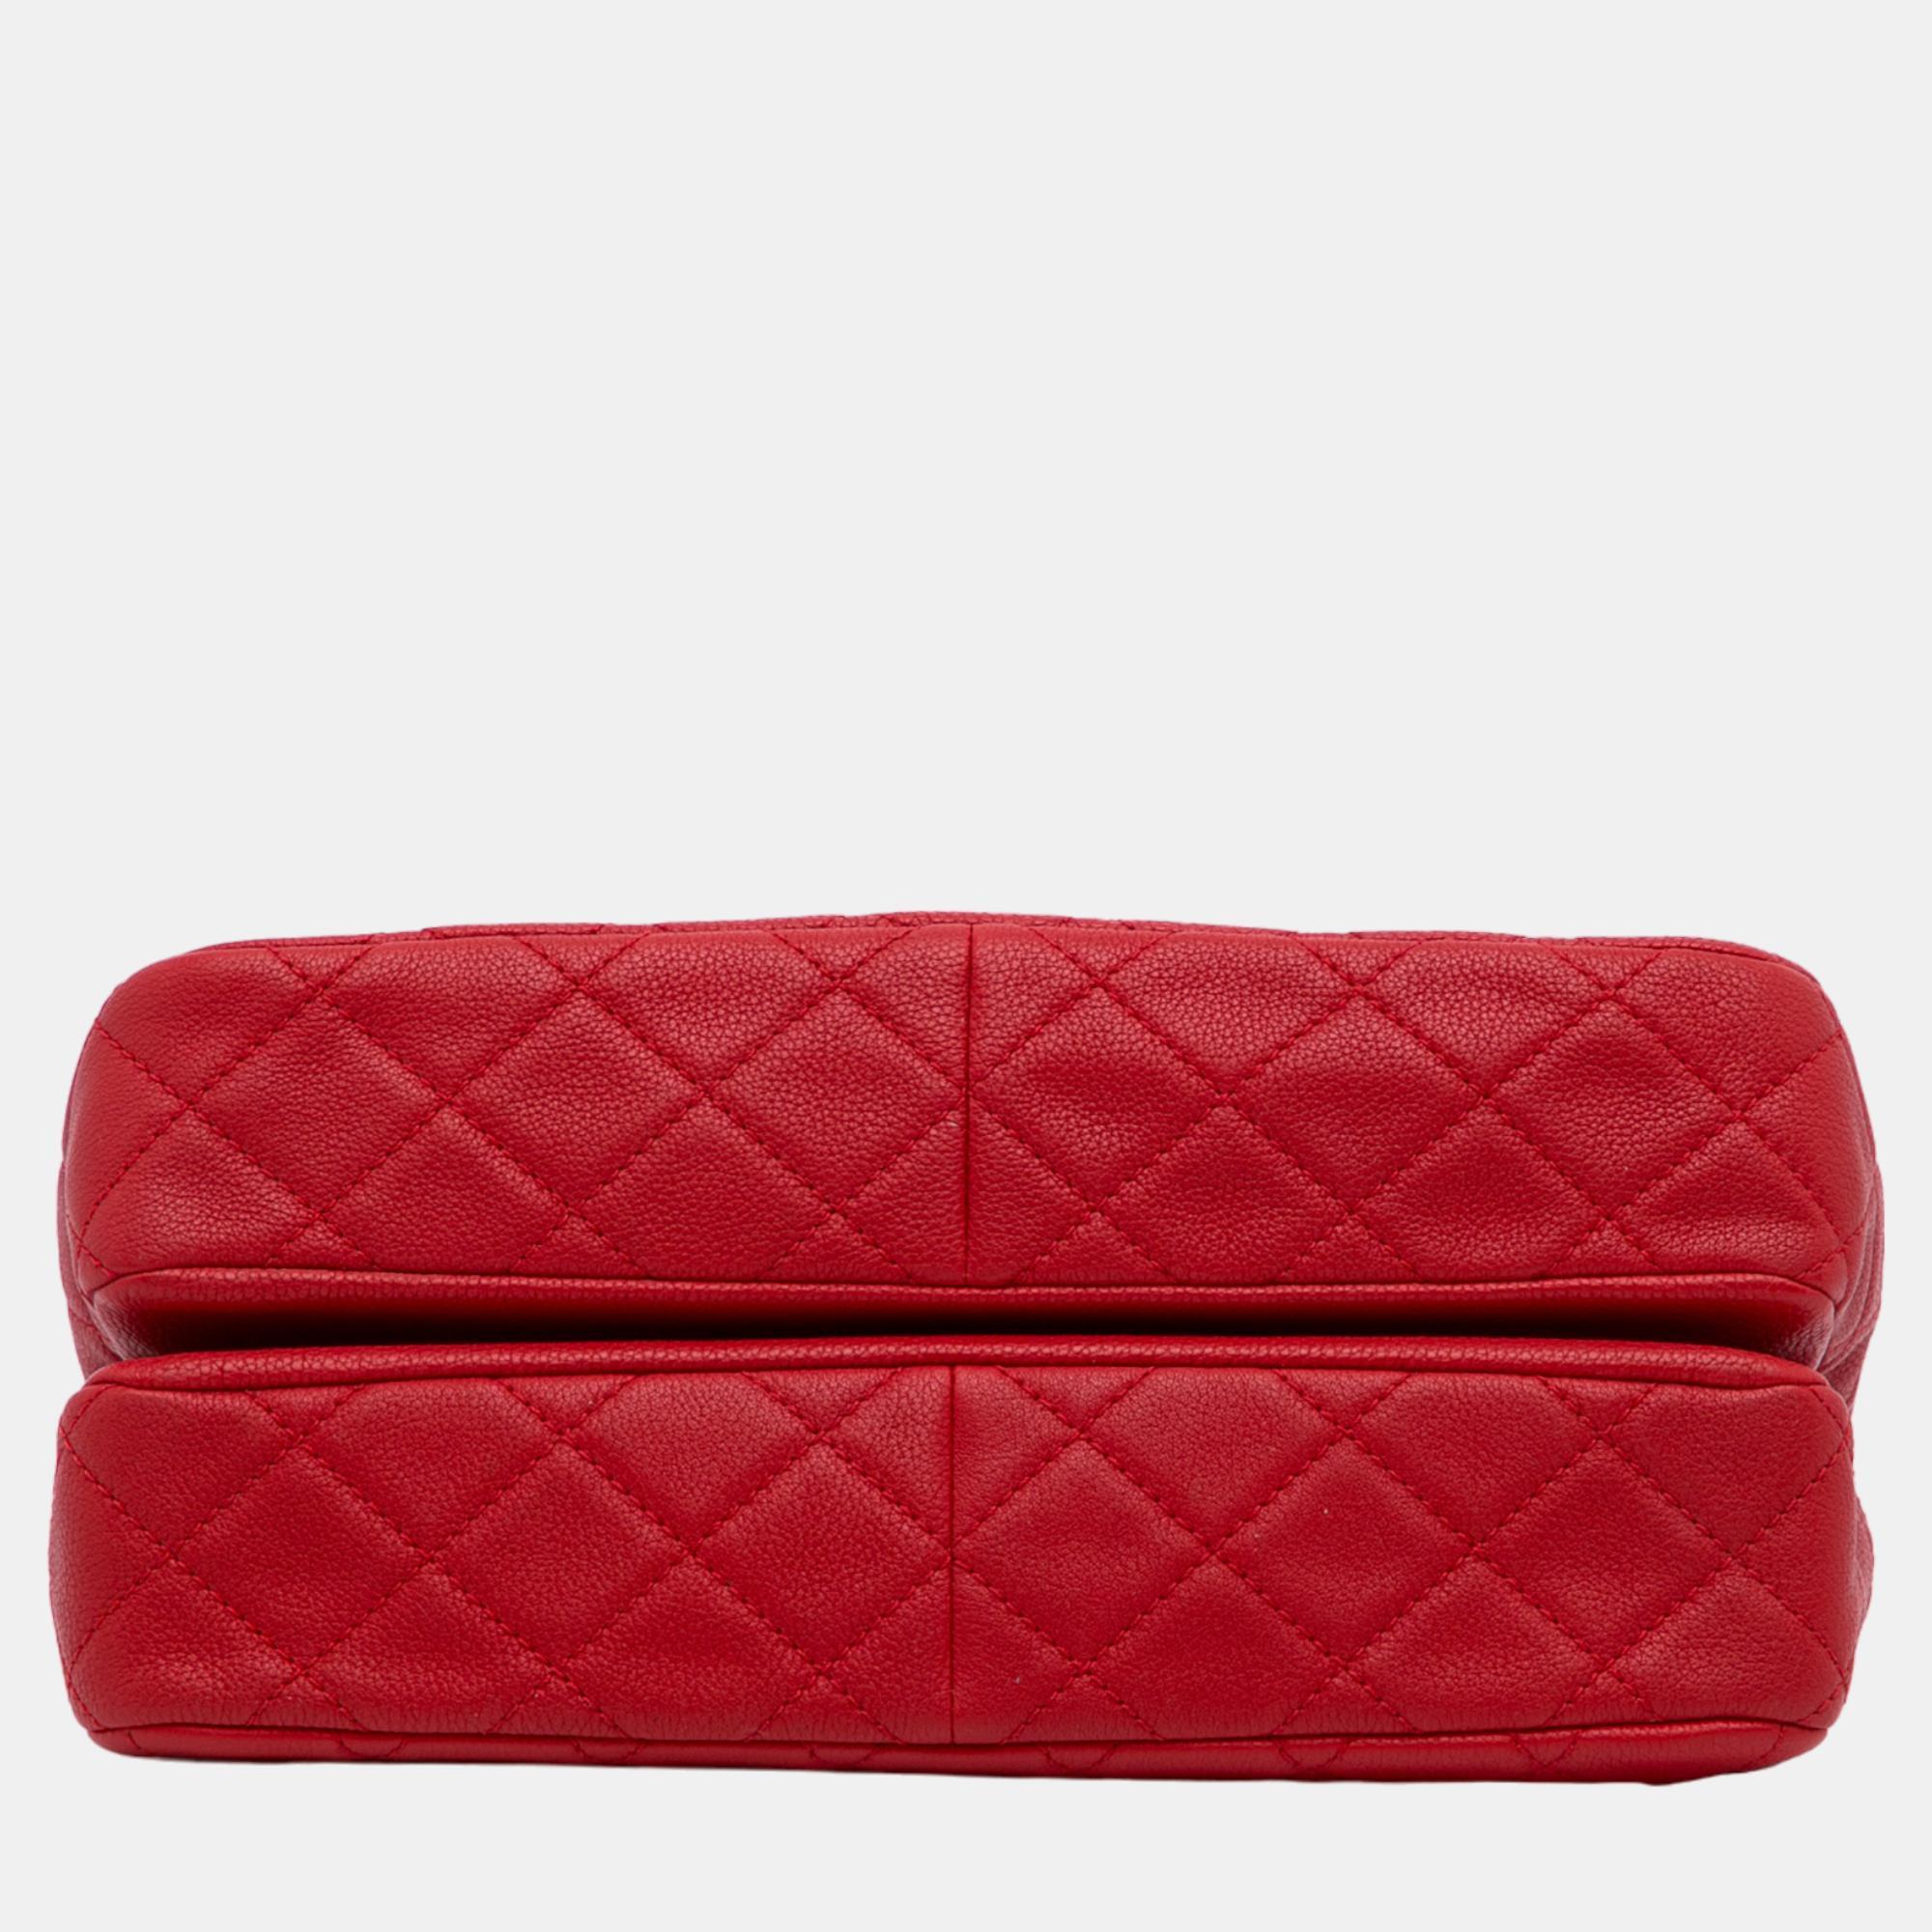 Chanel Red Caviar Double Compartment CC Chain Flap